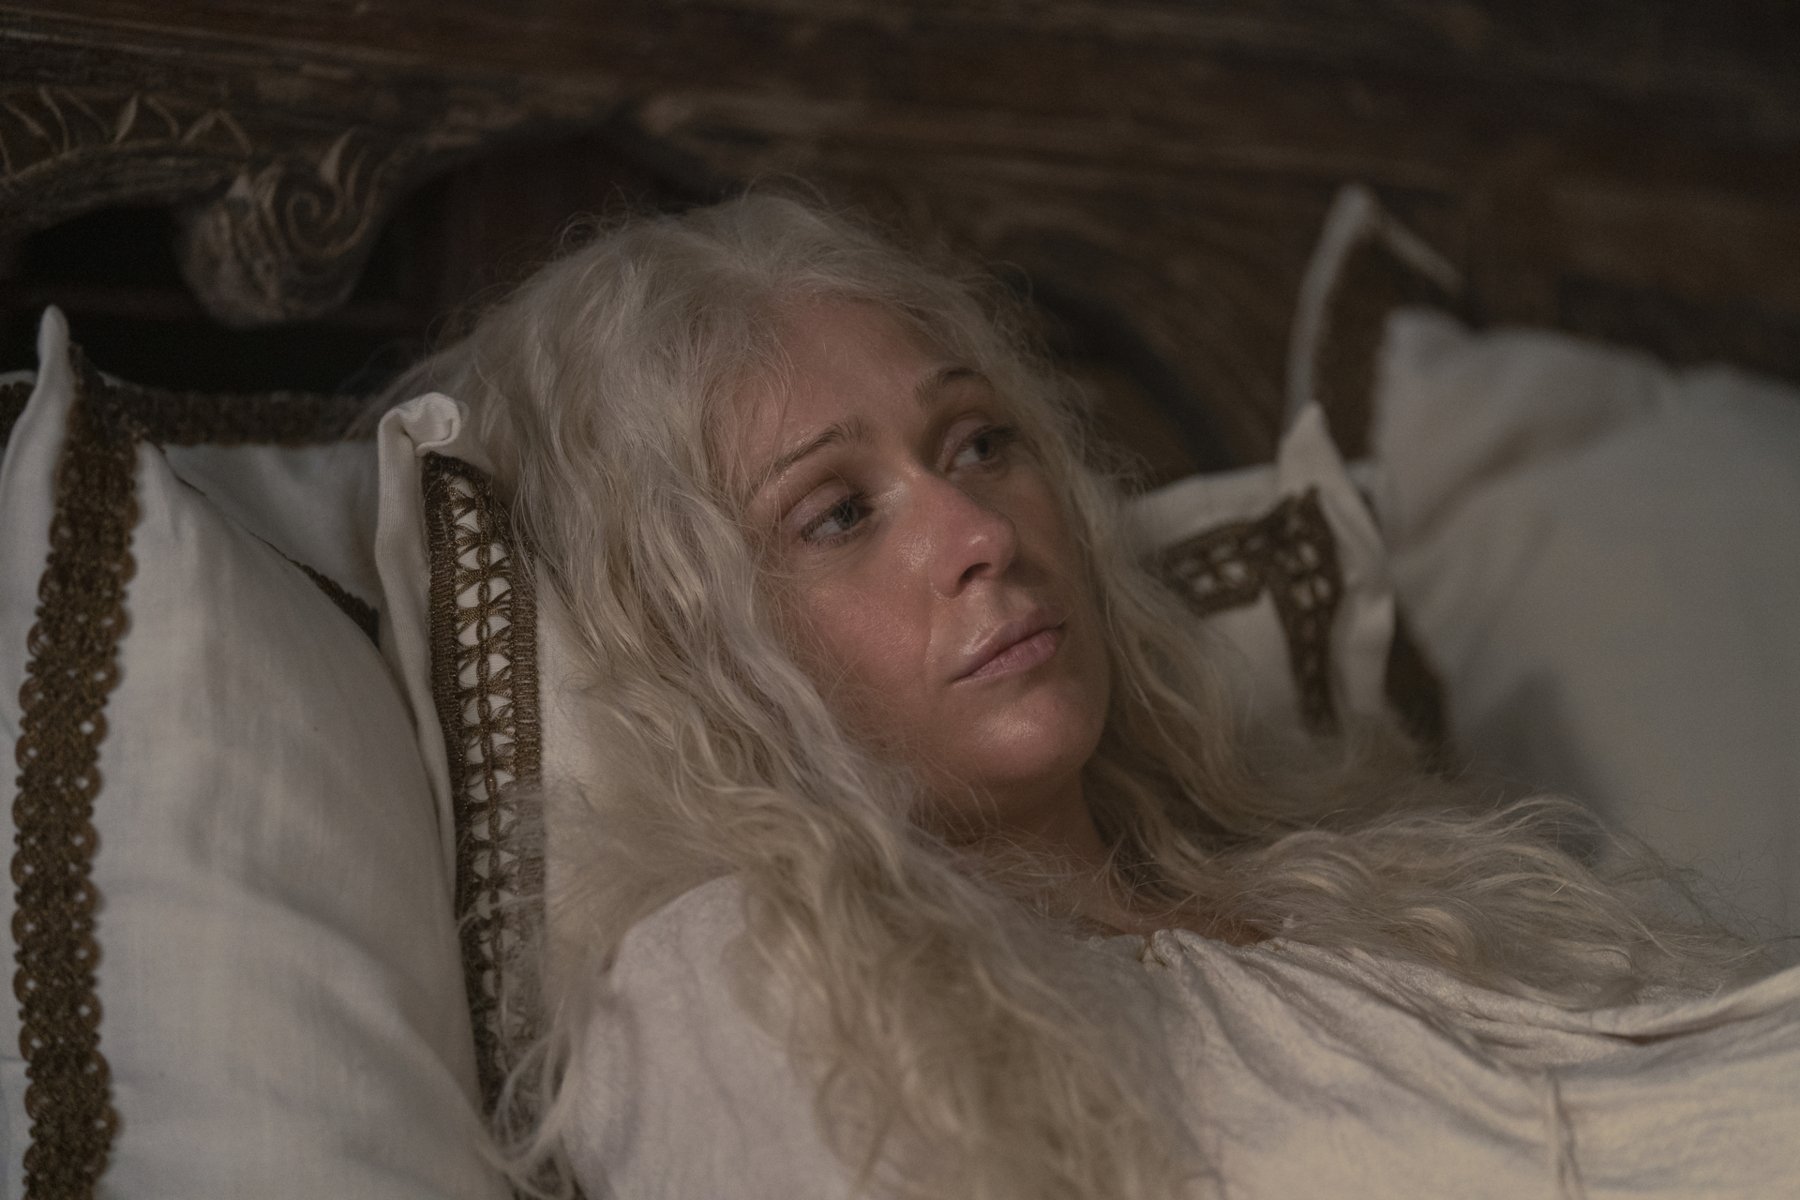 Sian Brooke as Aemma Arryn (before her death) in 'House of the Dragon' Season 1. She's laying in bed, and her blonde hair is down.